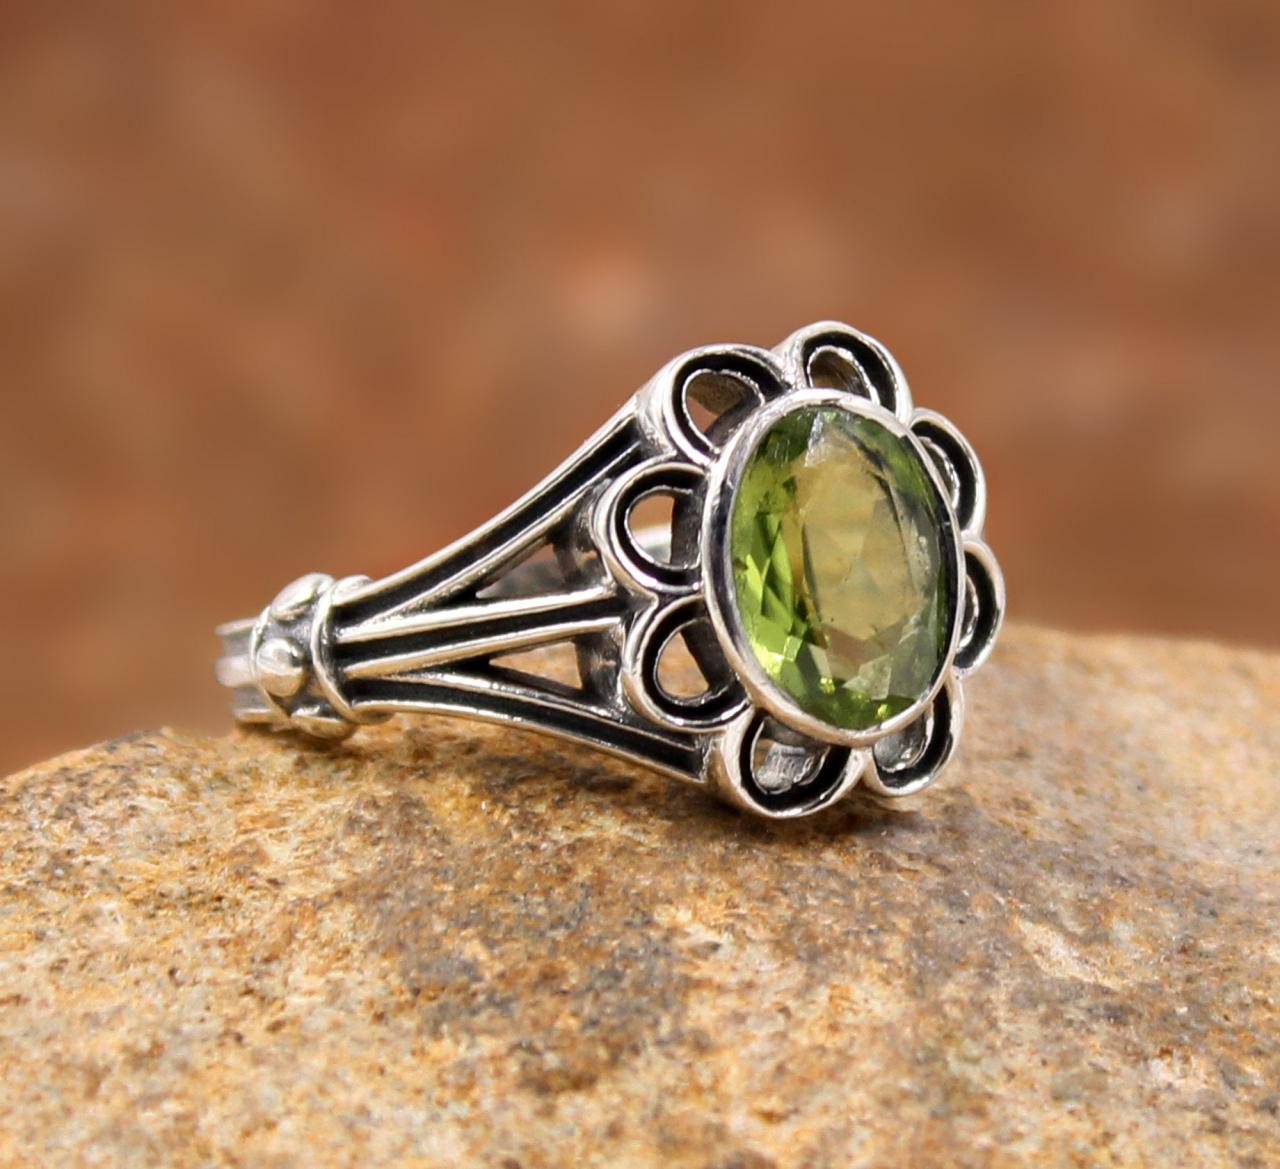 Designer Floral Peridot Ring,birthstone Ring Gift For Daughter,solid 925 Sterling Silver Oxidized Jewelry,baby Shower Gift,natural Gemstone